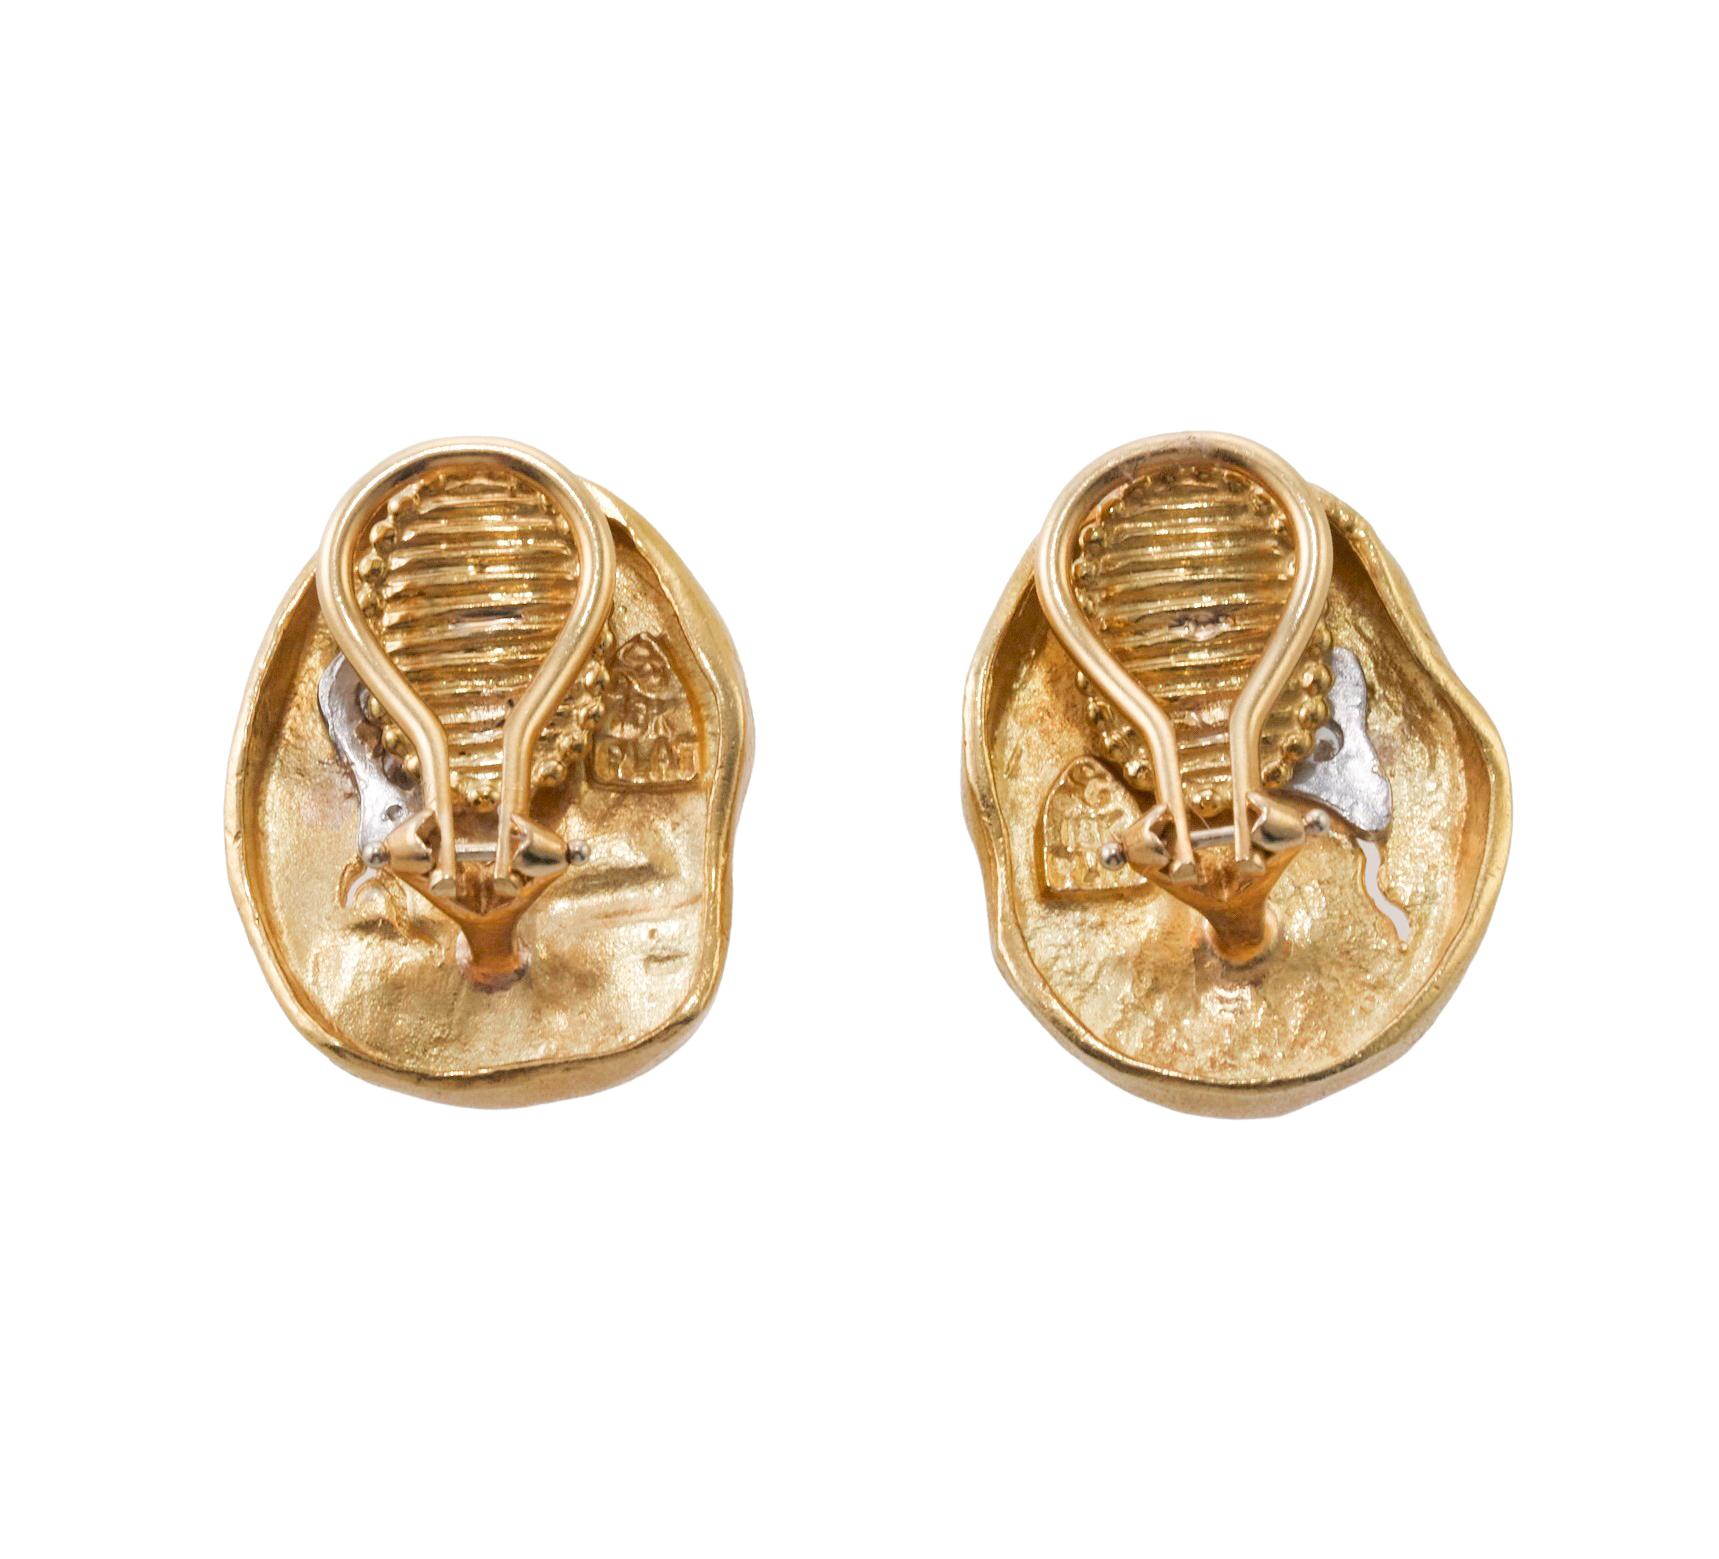 Pair of 18K gold and platinum Athena collection earrings by Seidengang, set with approx. ).14ctw in VS/G diamonds. Earrings measure 23mm x 18mm. Marked: SG mark, Plat, 18k. Weight is 17 grams. 